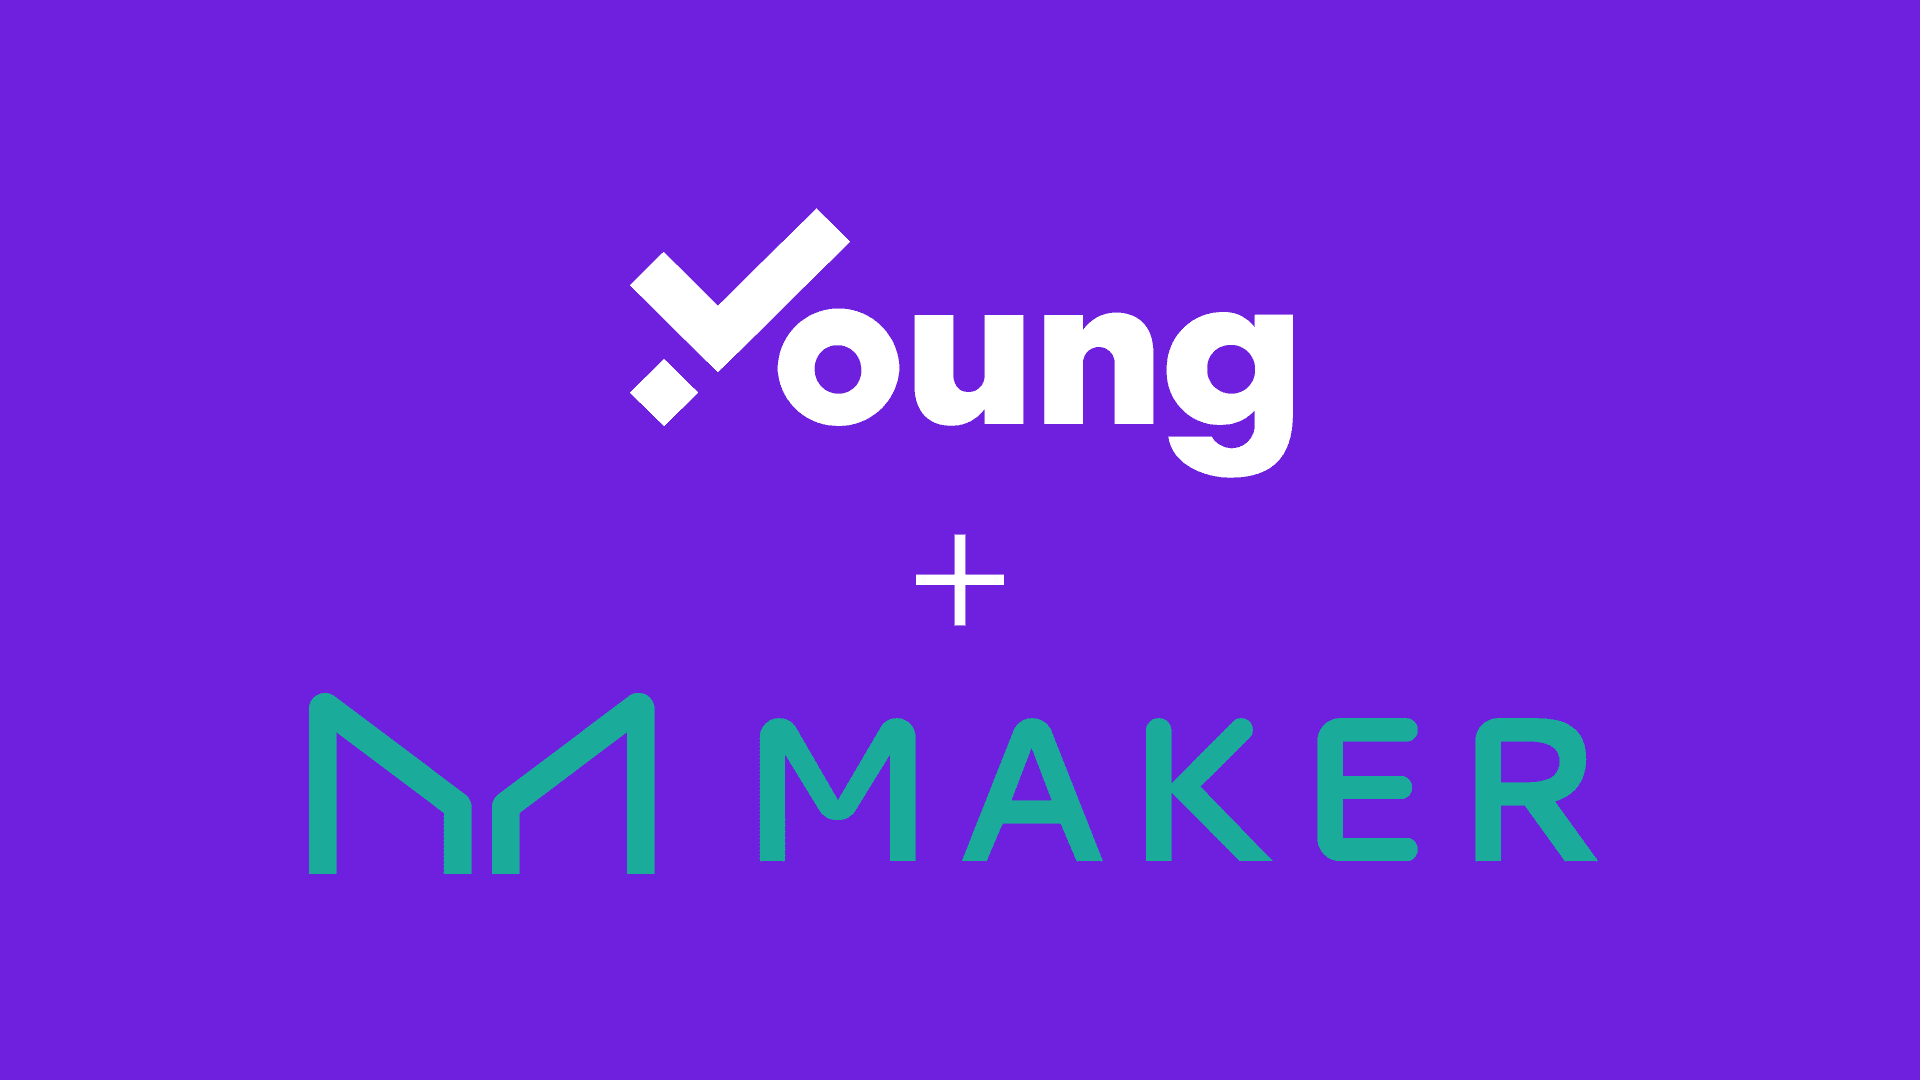 Young announces the new partnership with MakerDAO!